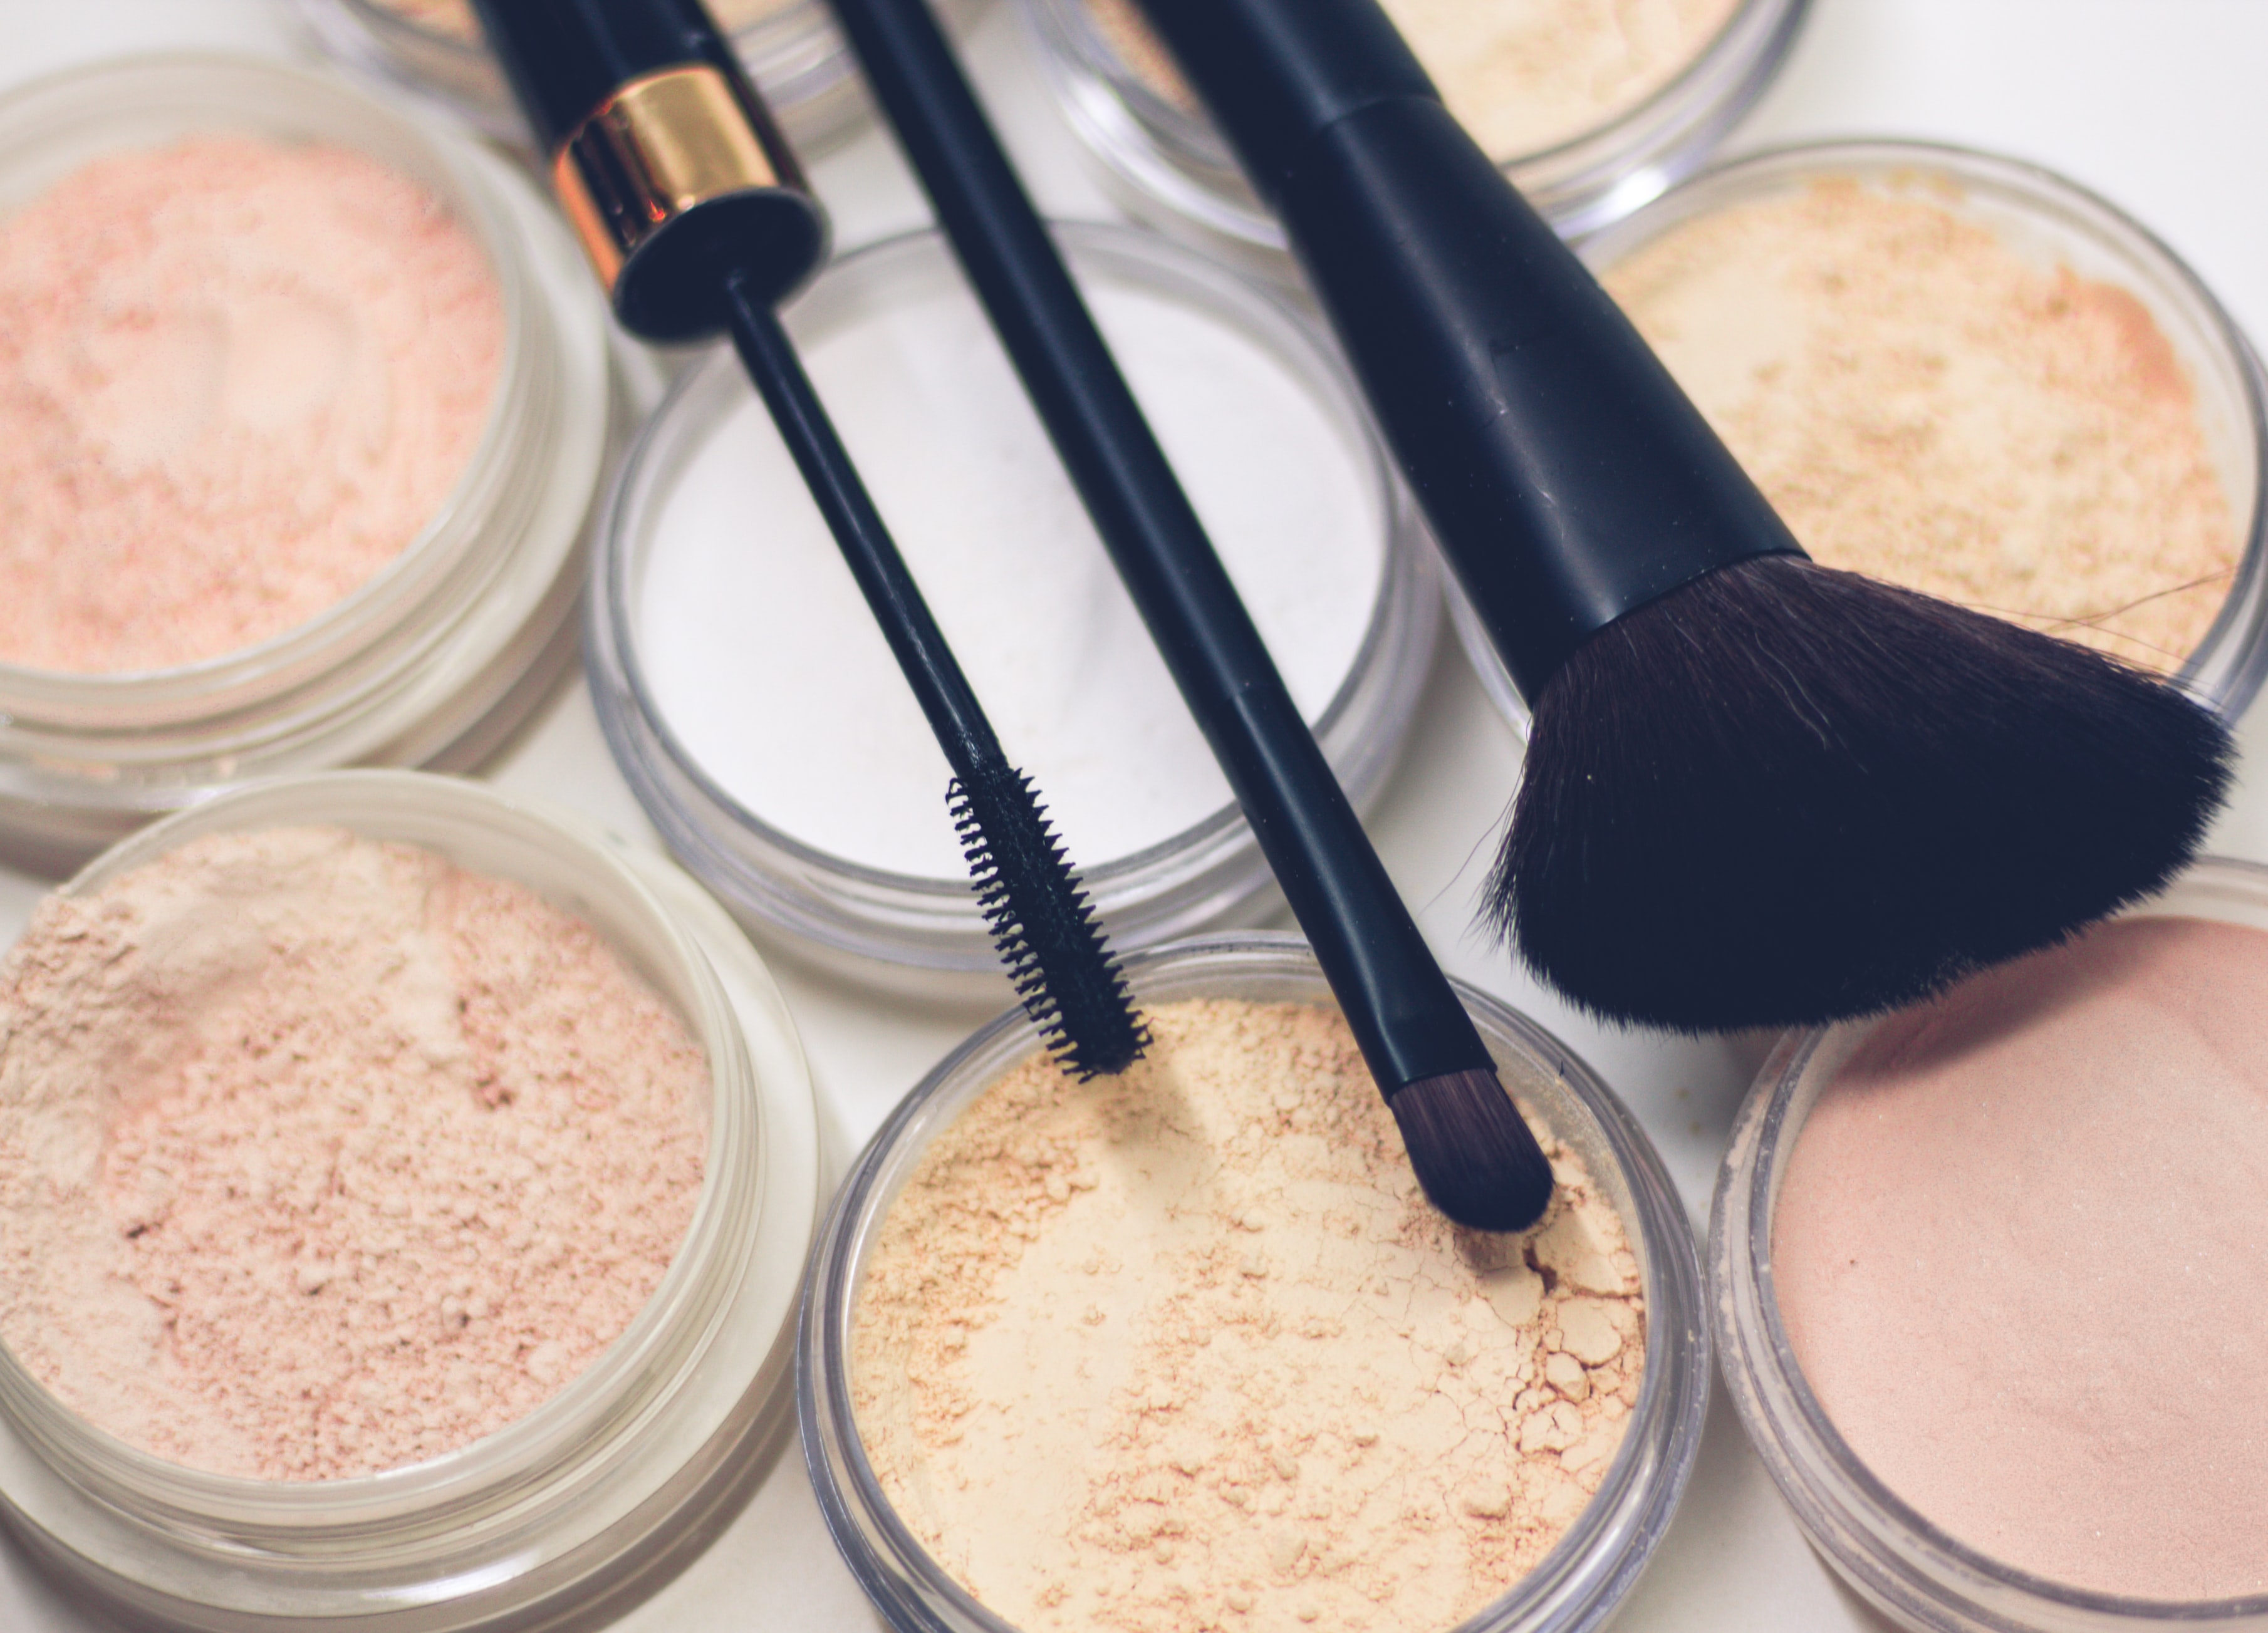 loose powder foundation and makeup brushes